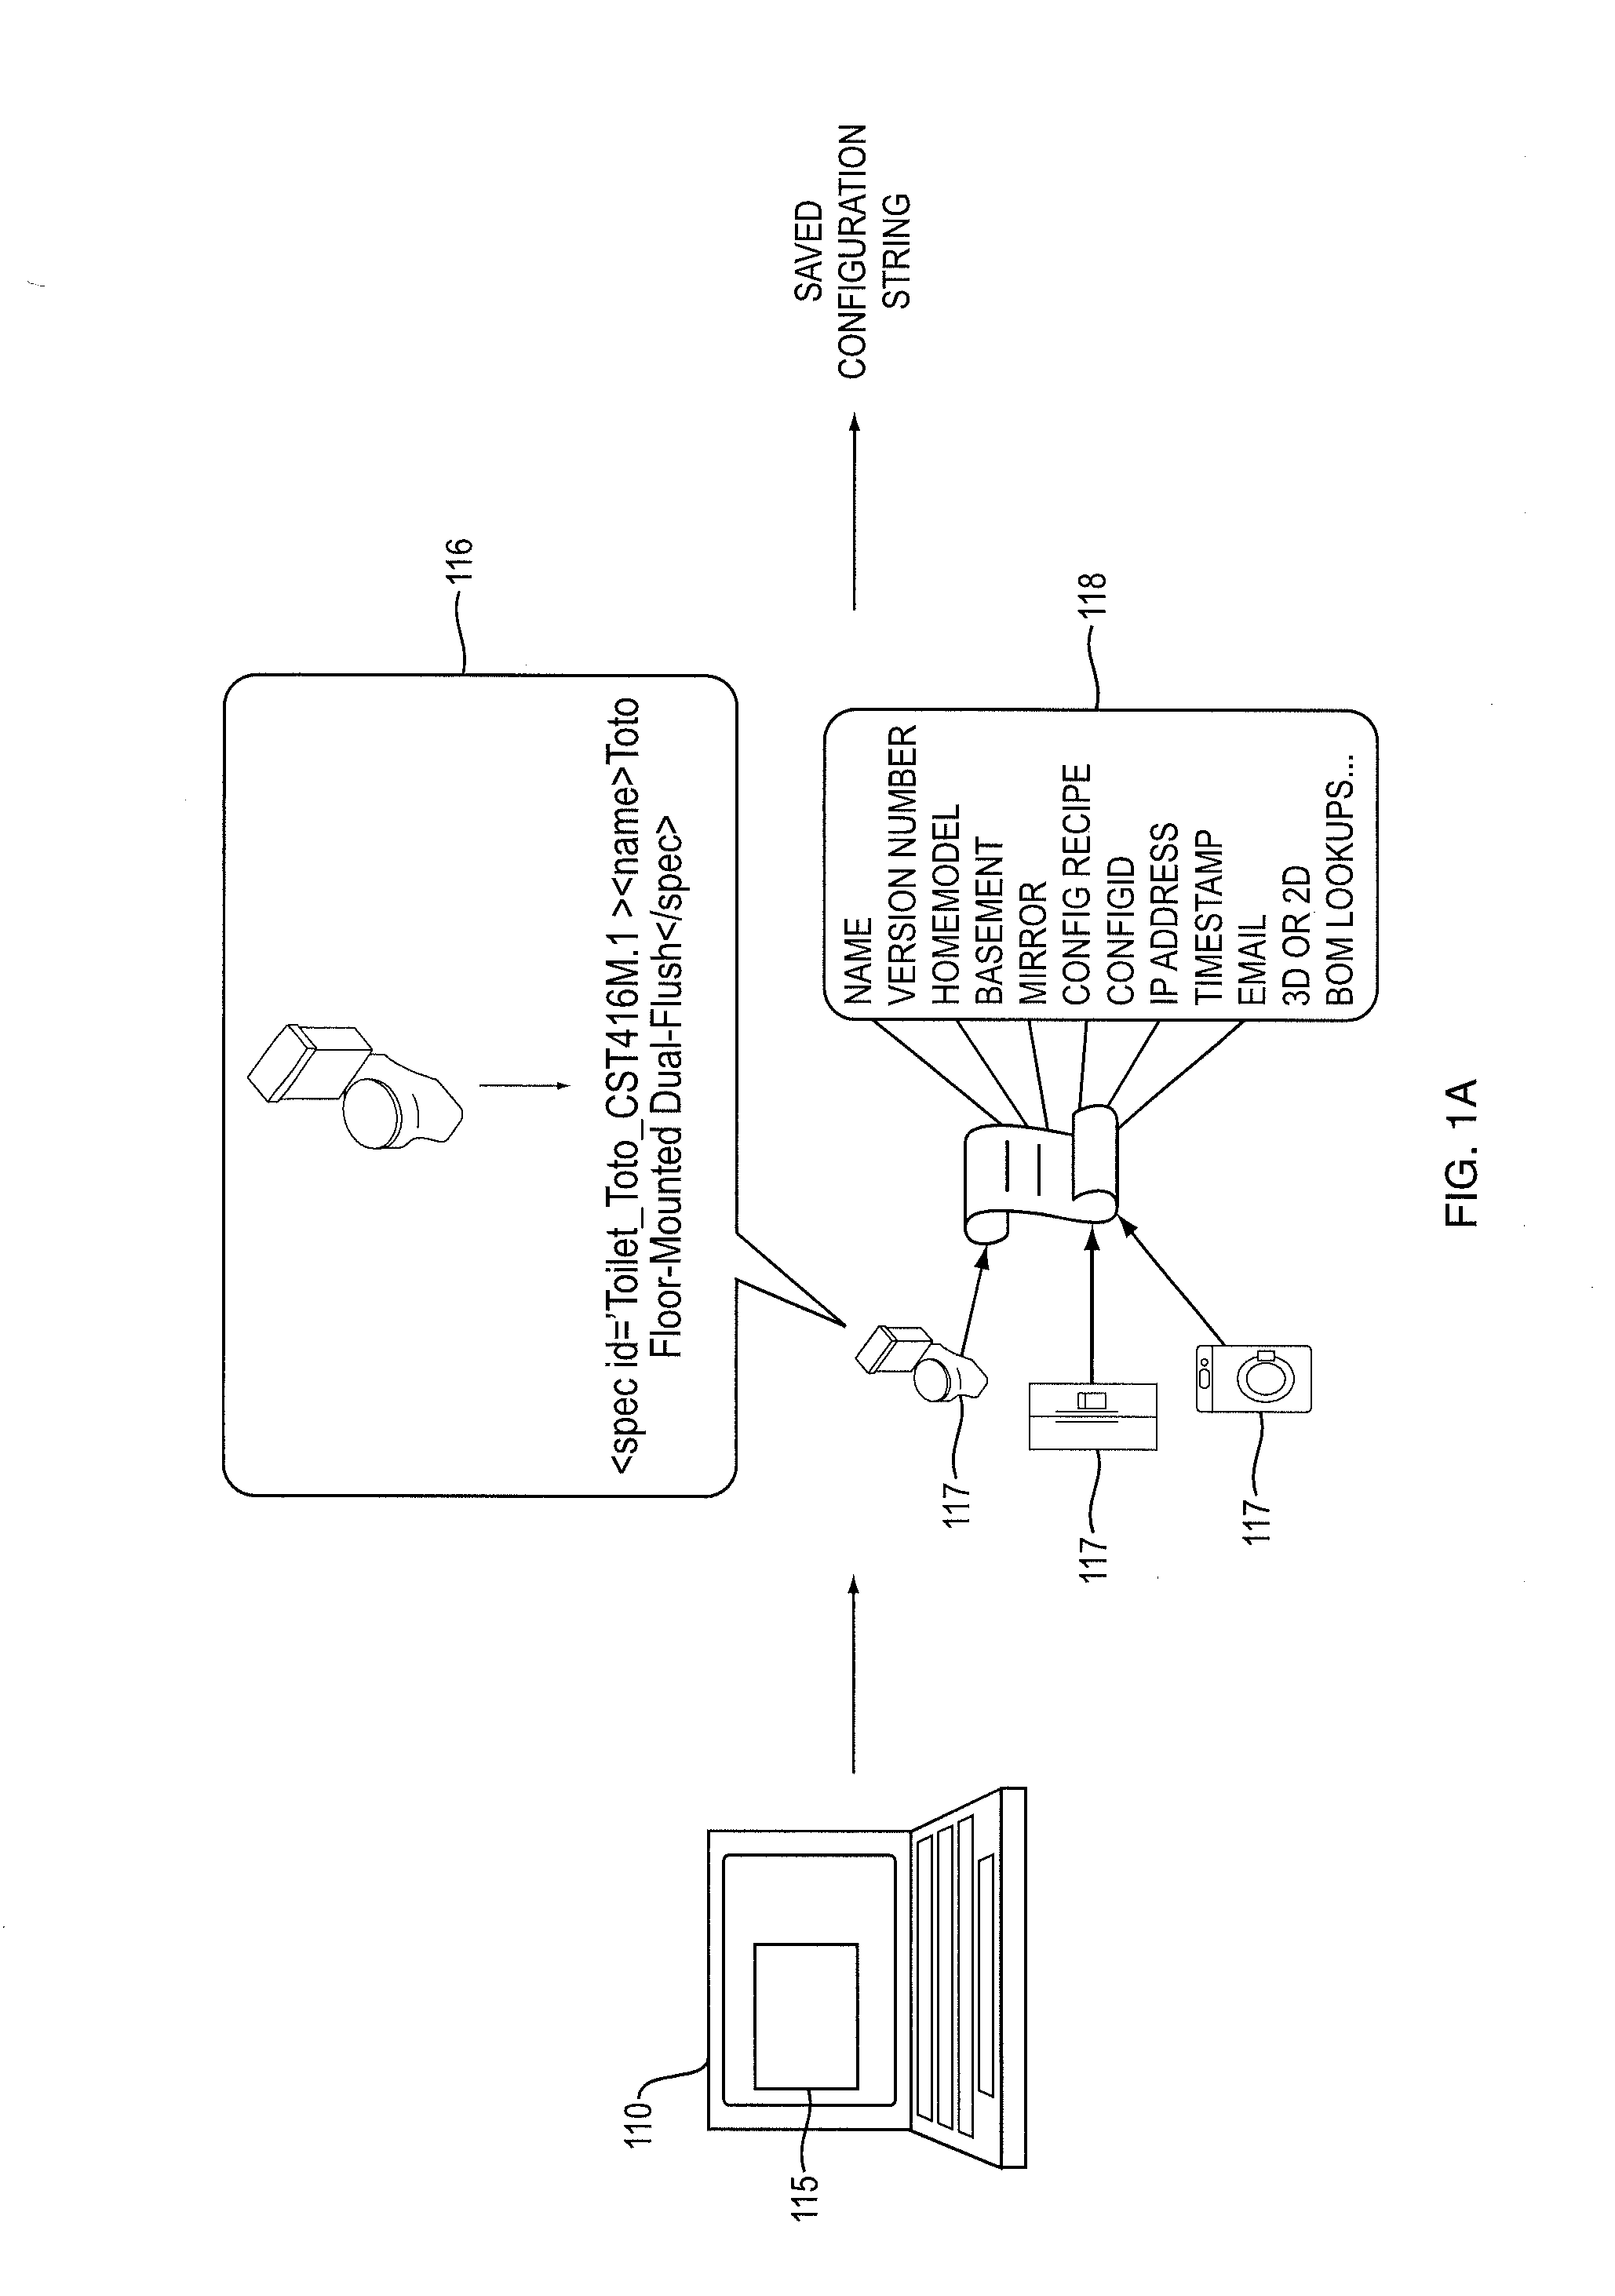 Method, apparatus and system for customizing a building via a virtual environment